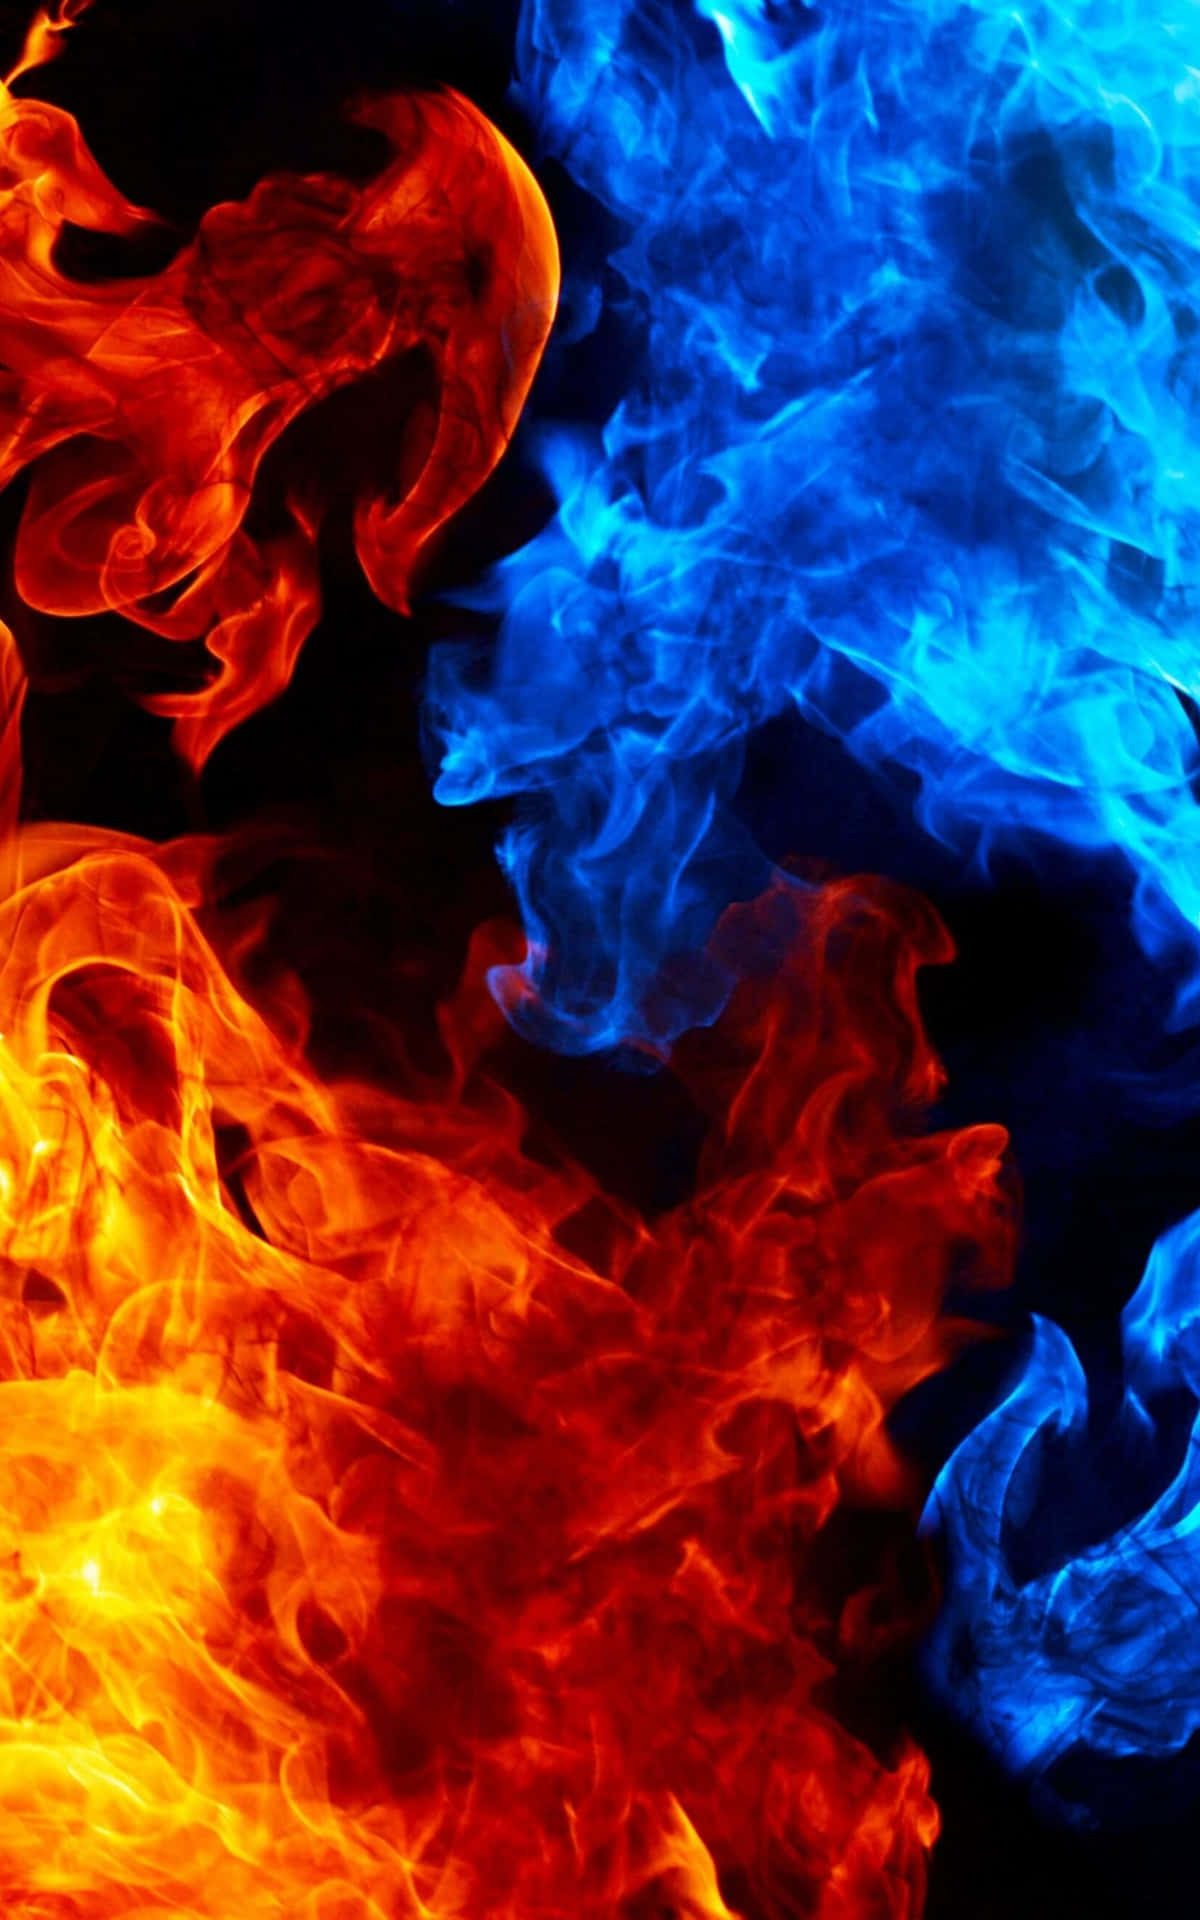 Unbelievable Red and Blue Fire Combination Wallpaper